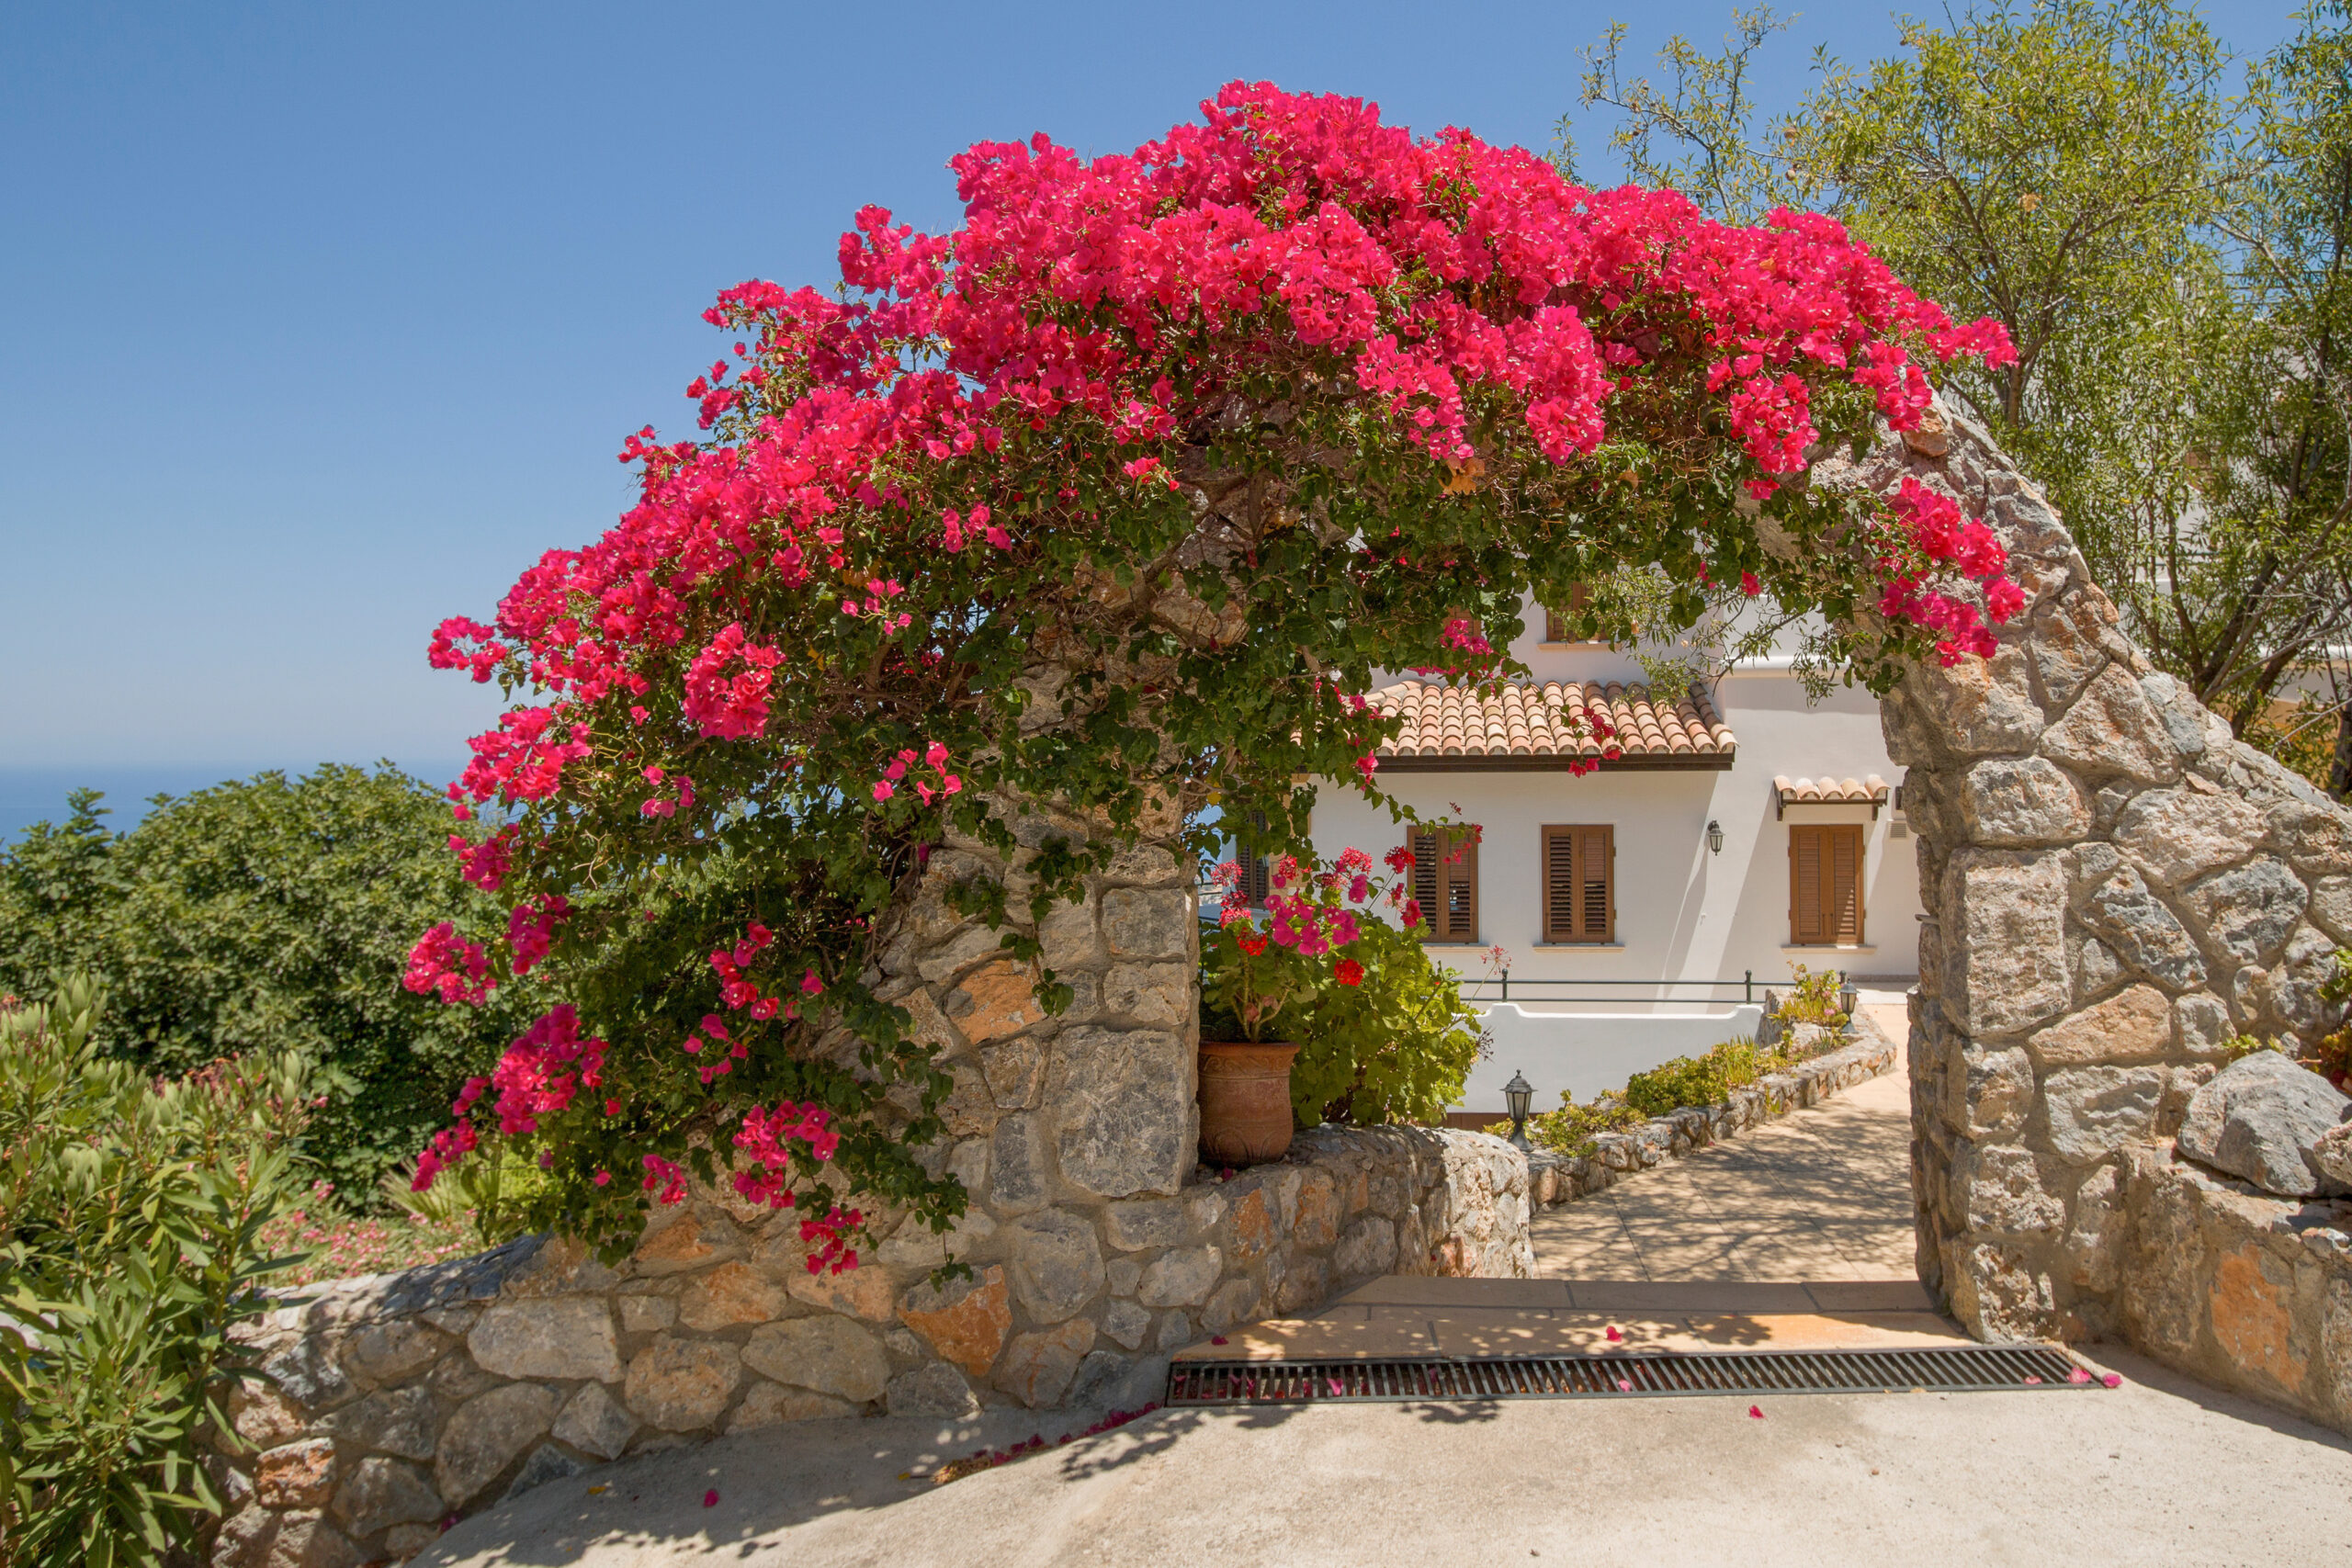 Bougainvillea overgrown arch with traditional house in the background.